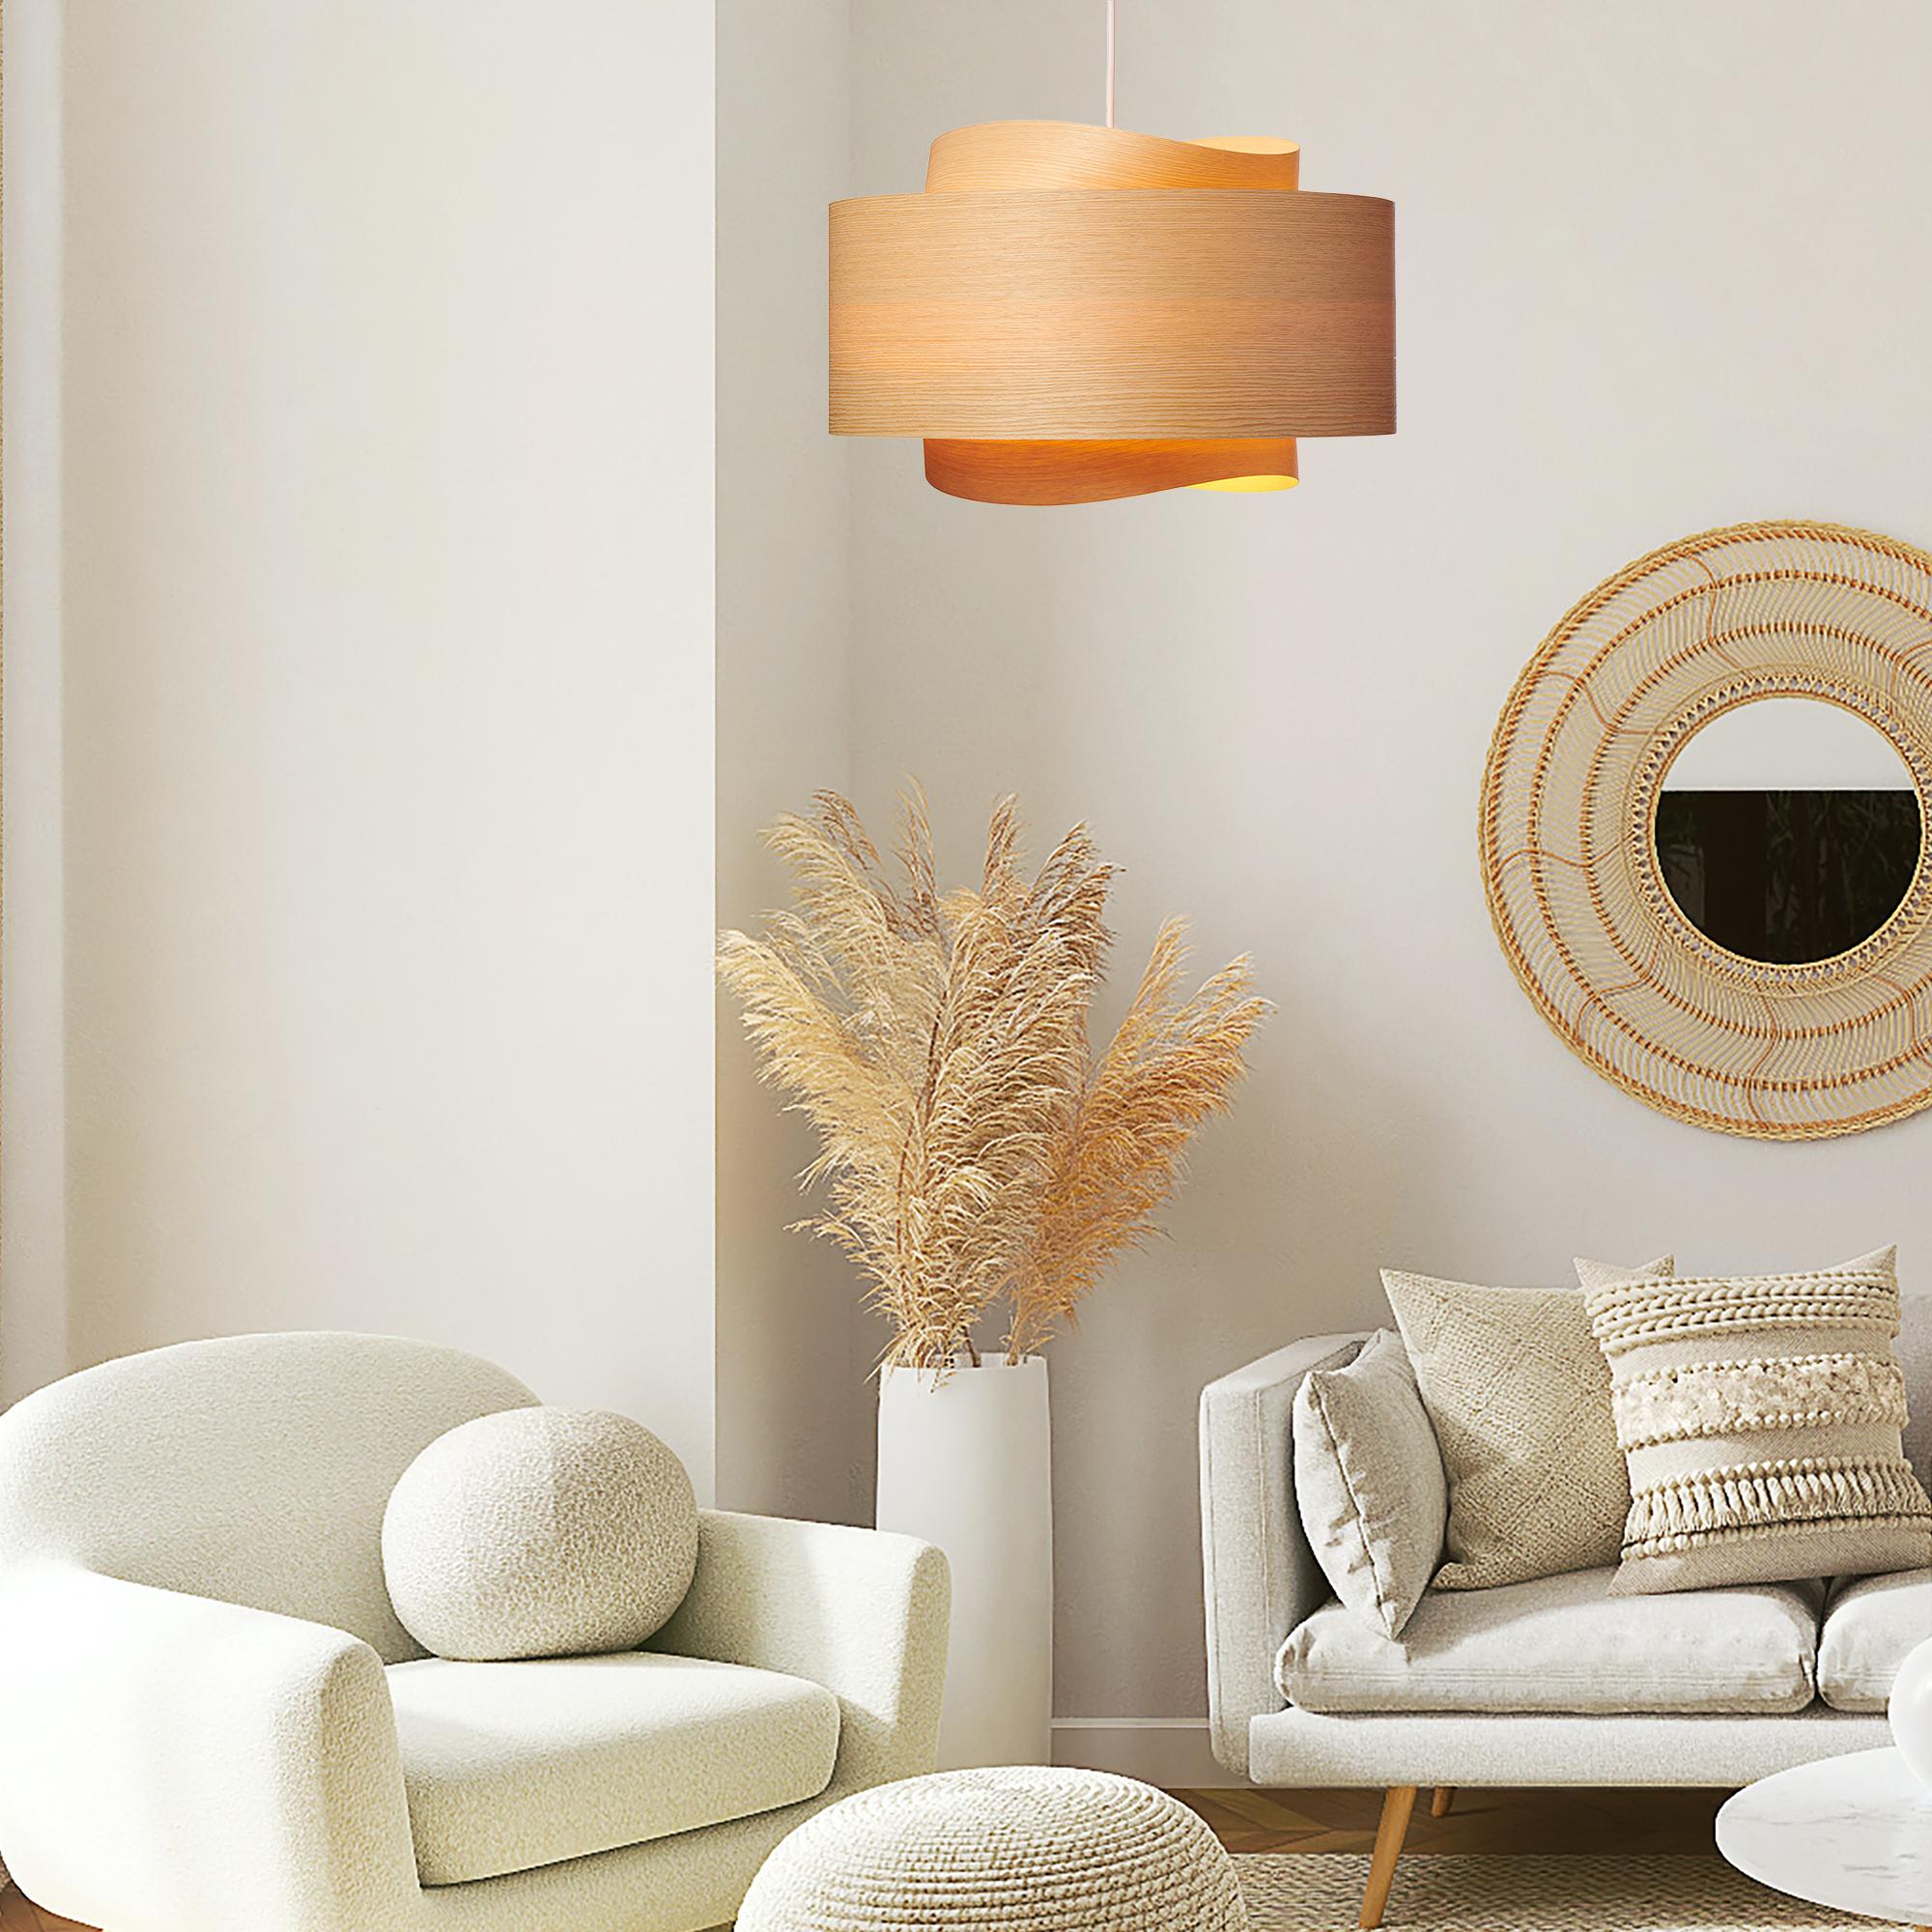 The BOWEN light fixture is a stunning example of contemporary Mid-Century Modern design. With its minimalist silhouette, warm wood tones, and unique shape, this pendant light is sure to add a touch of sophistication to any space.

The BOWEN light